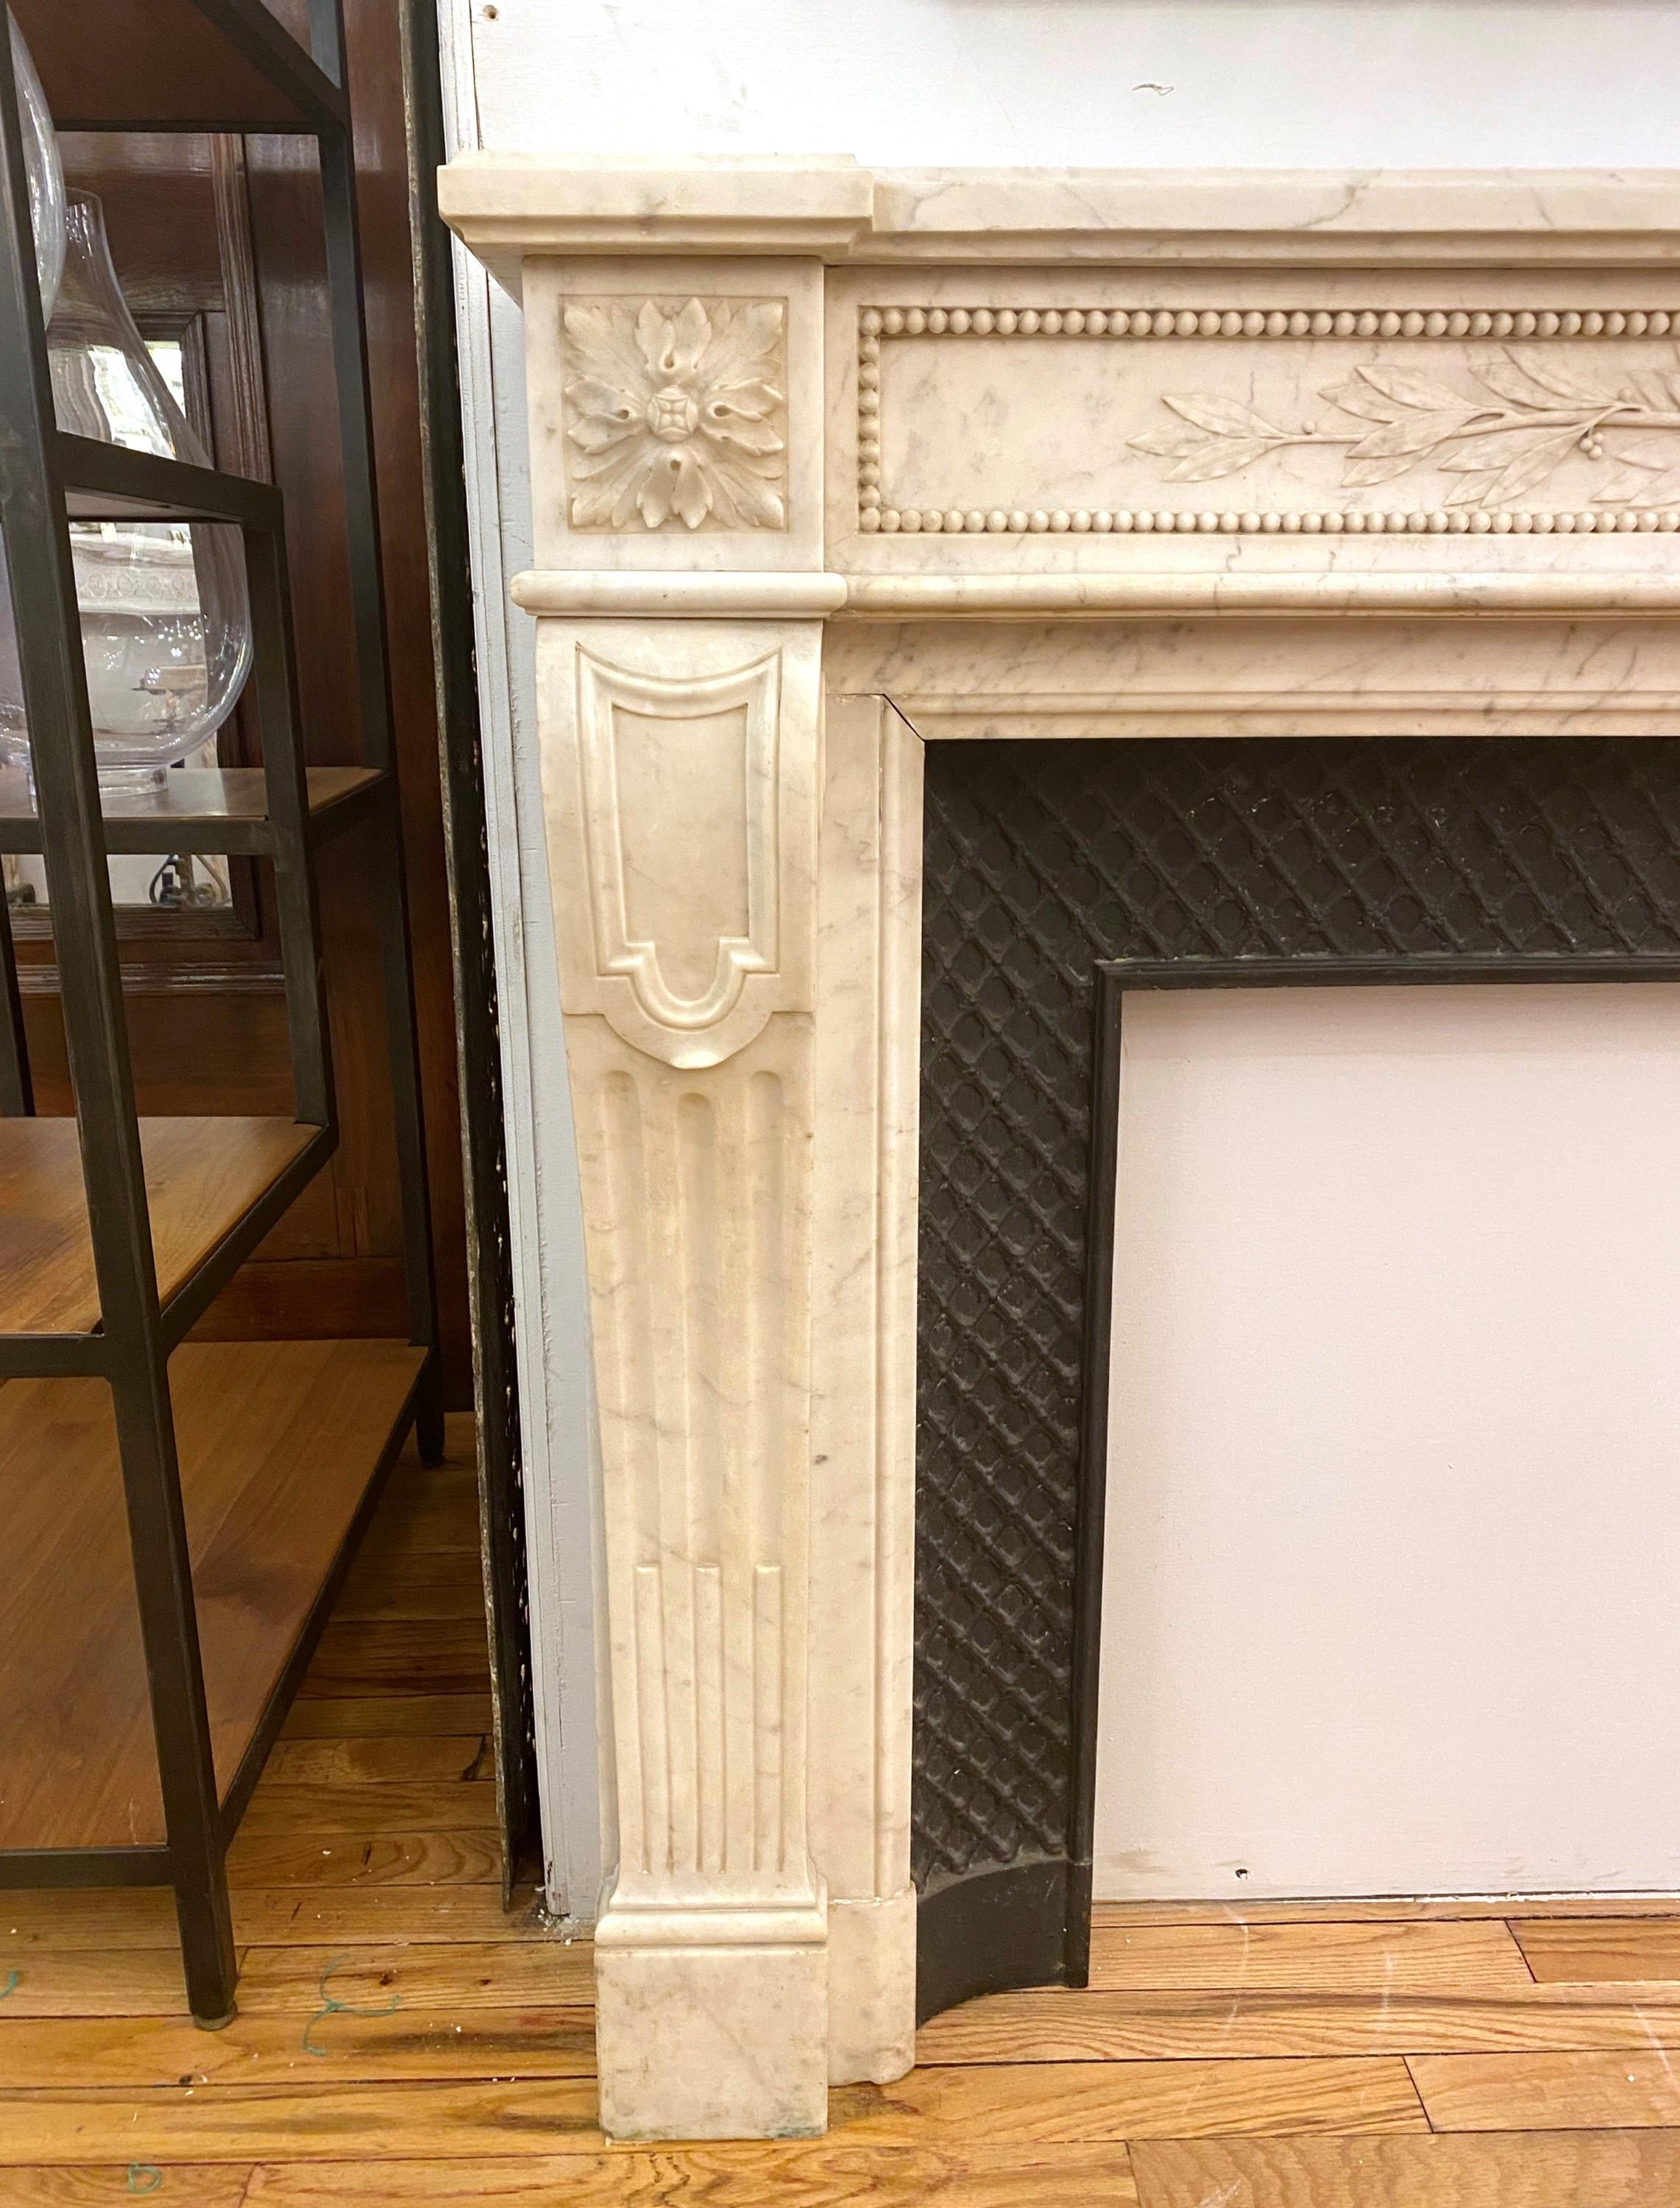 Louis XVI French white marble mantel with a cast iron insert. The breast of the mantle is decorated with a carved center wreath and foliage, framed by a beaded border. Hearth not included. Please note, this item is located in one of our NYC